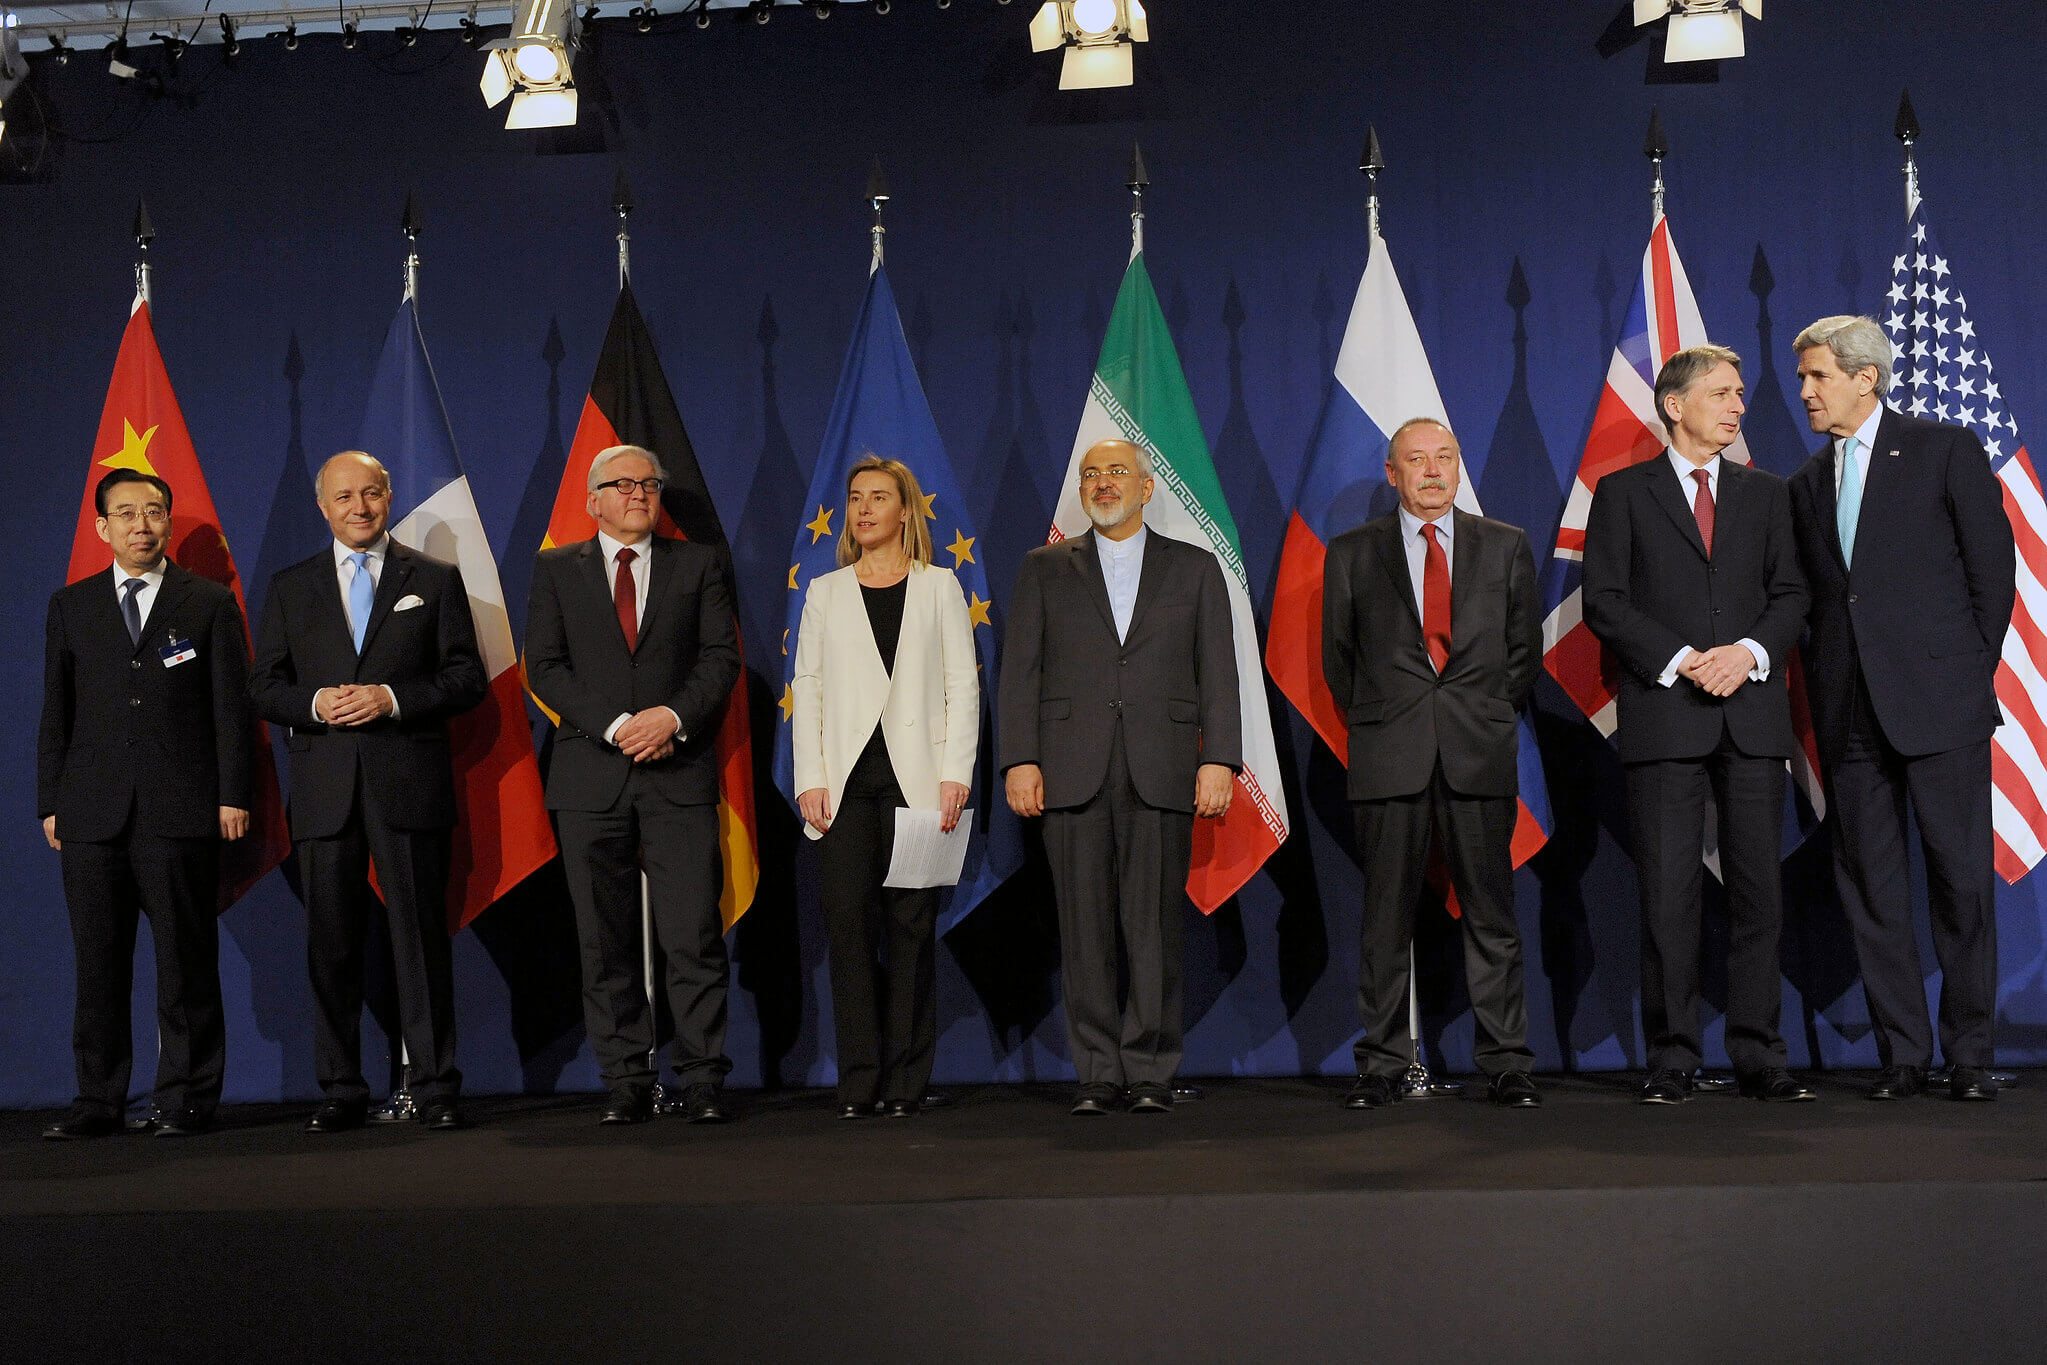 Erasto-Political leaders on April 2 2015 during the announcement of the JCPOA after negotiations in Lausanne. European External Action Service